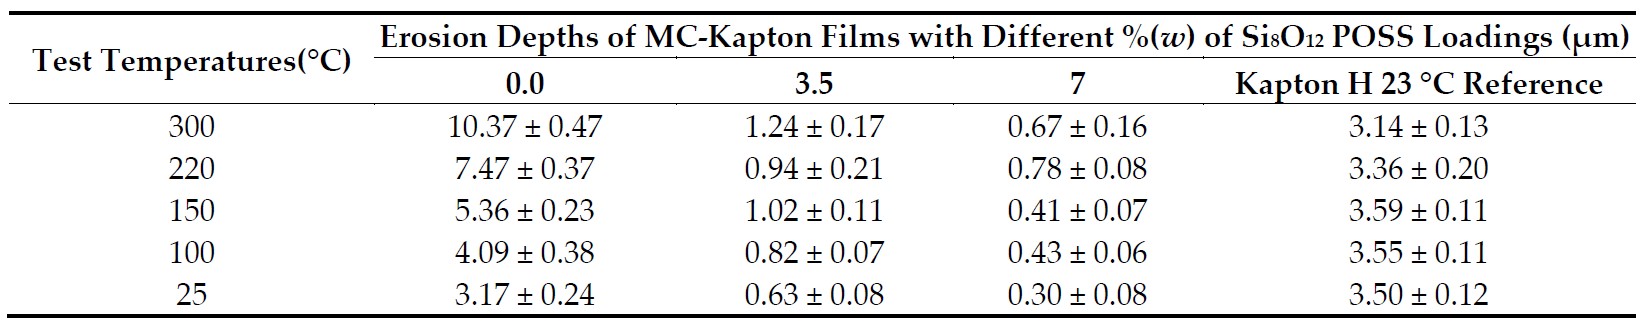 Table 7. The Laboratory Atomic Oxygen Erosion Depths of MC-Kapton Films at Different Temperatures [62].